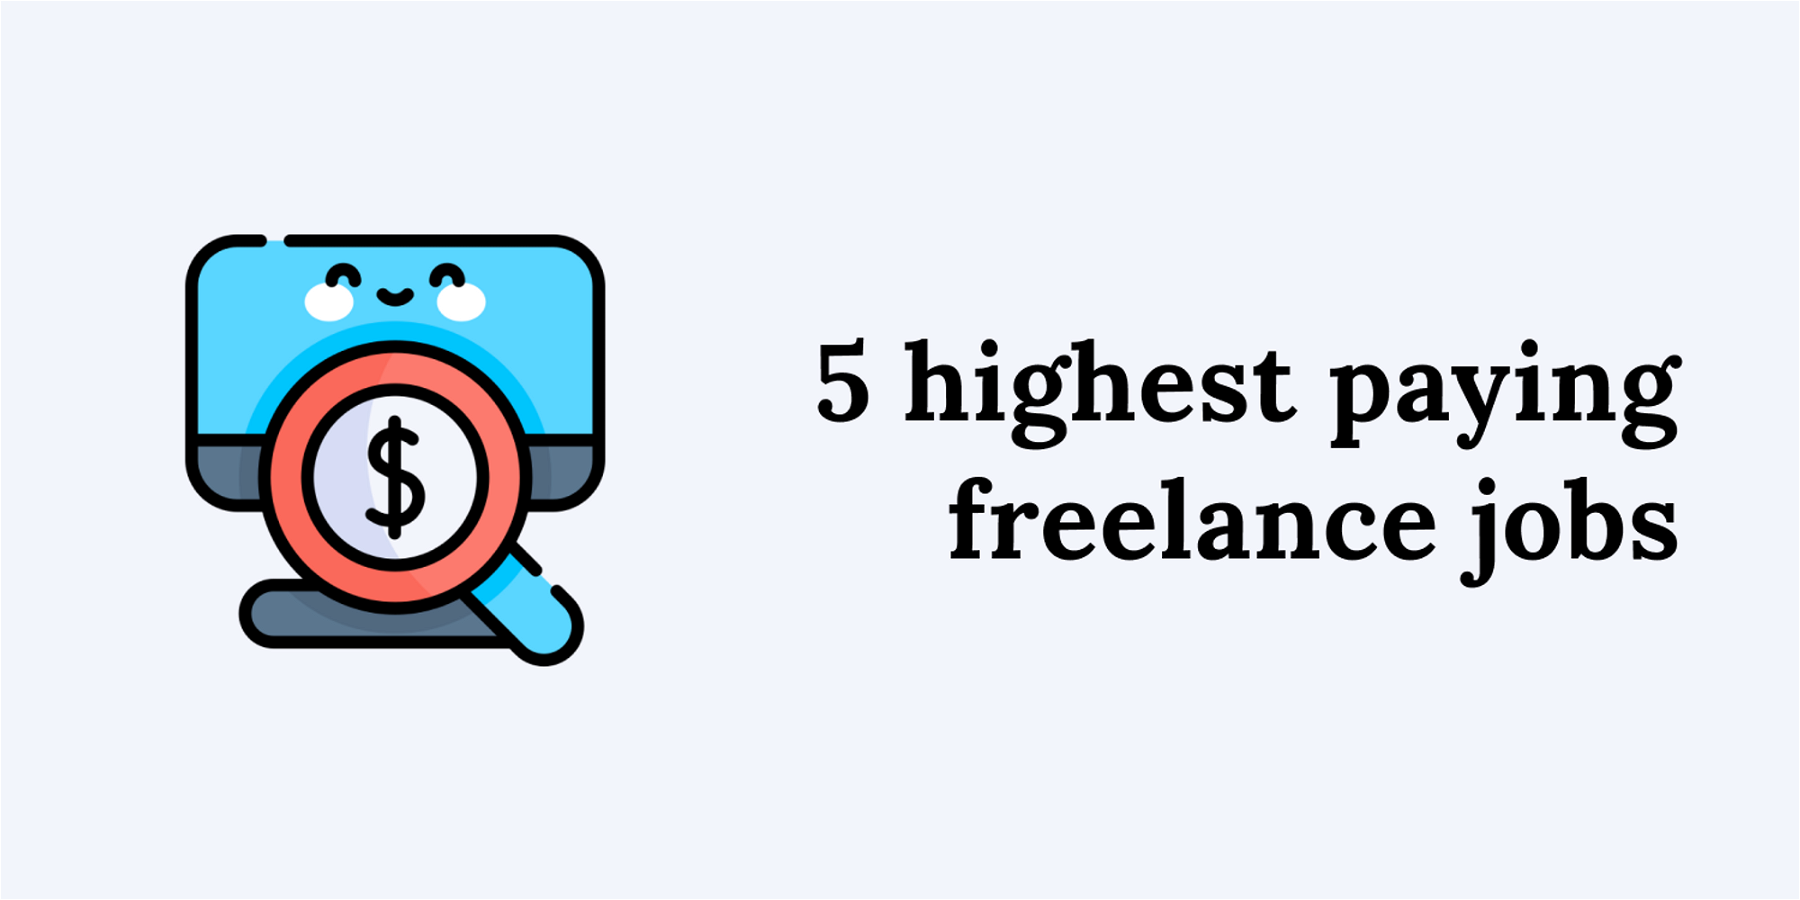 Top 5 highest paying freelance jobs